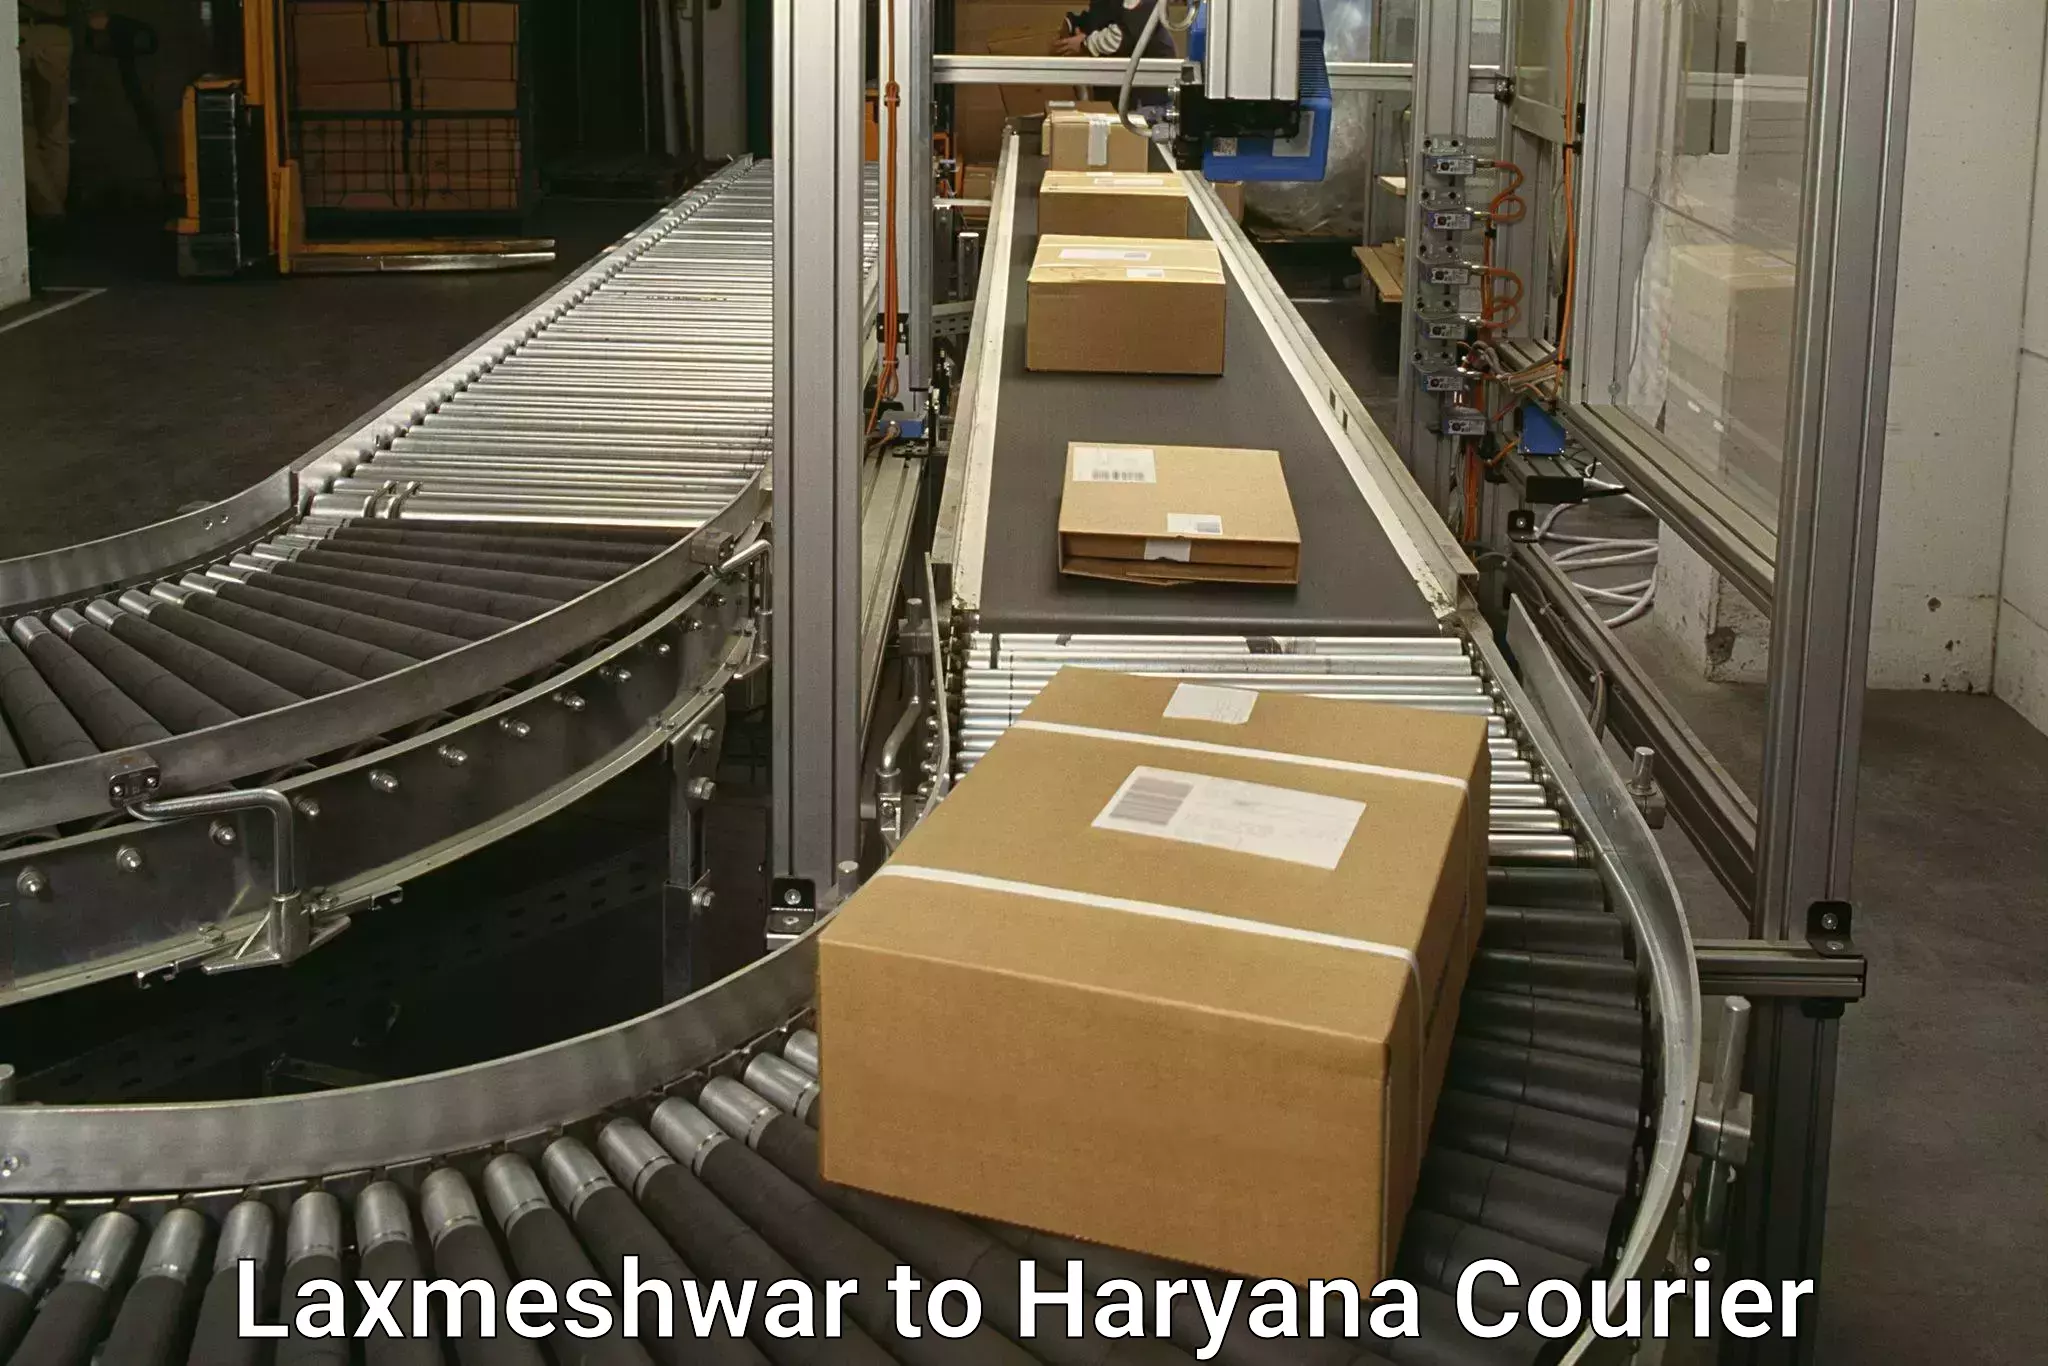 Courier service comparison Laxmeshwar to Siwani